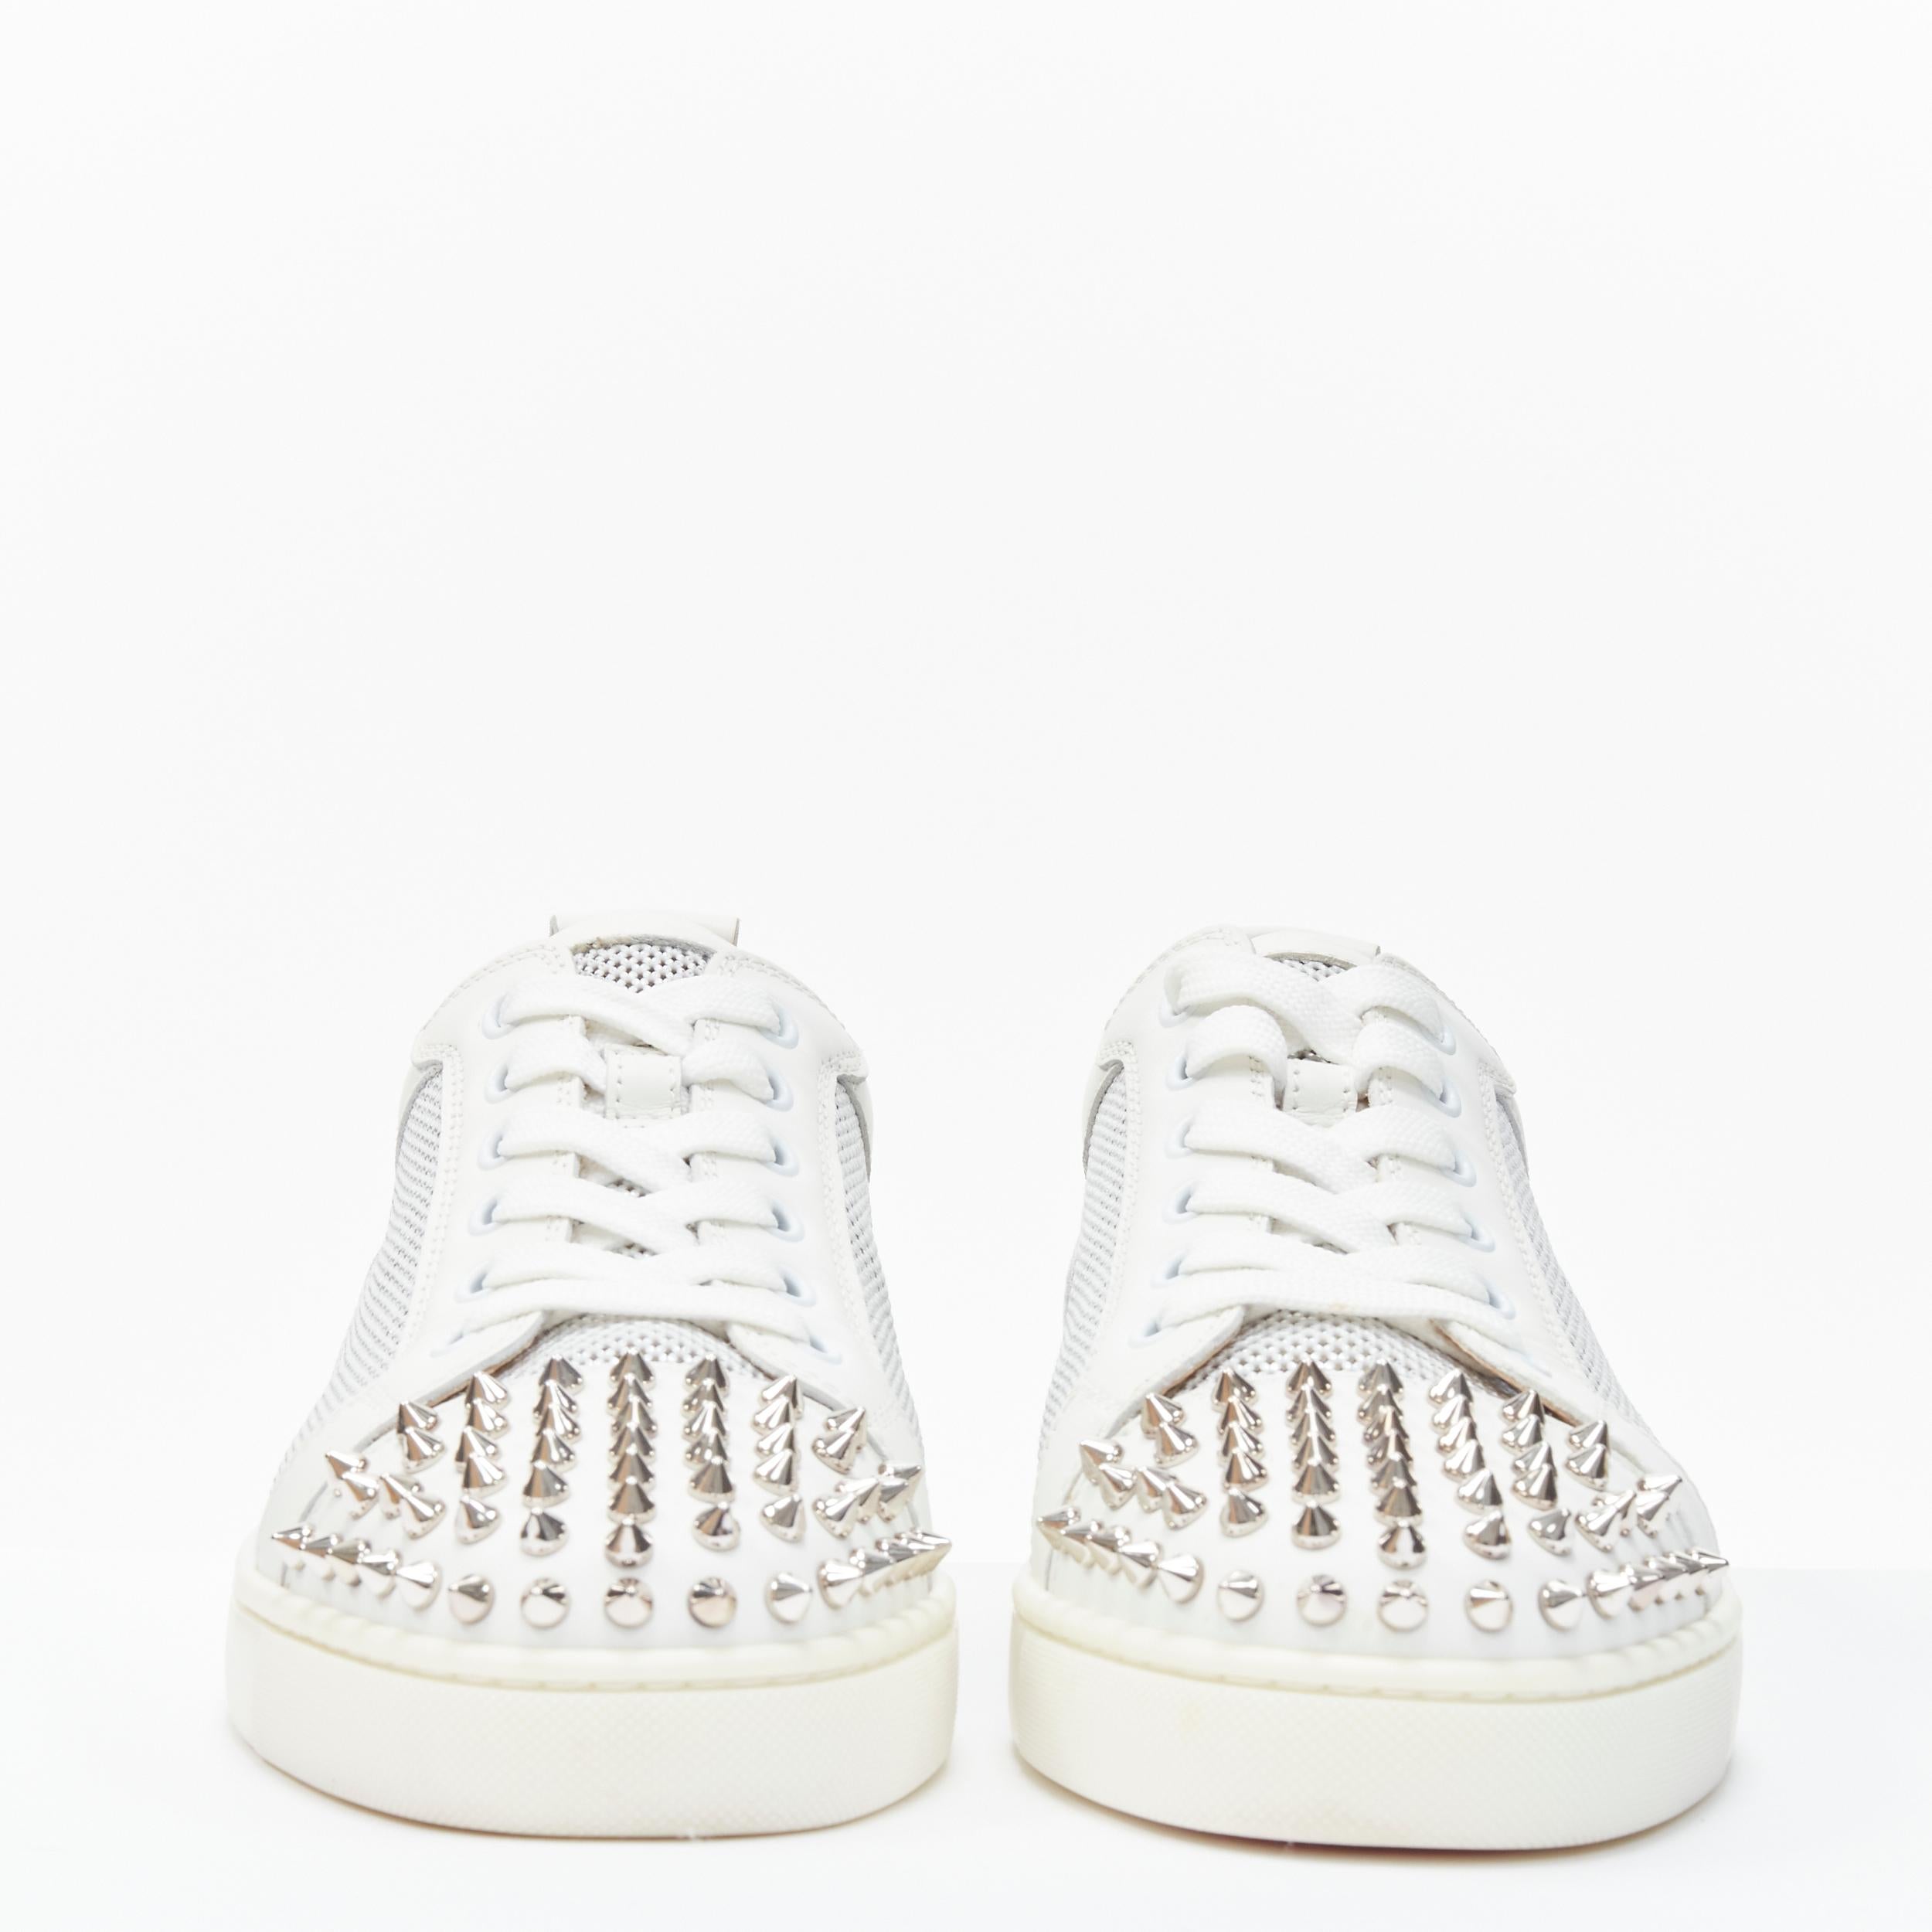 new CHRISTIAN LOUBOUTIN Louis Junior Spikes white silver low top sneakers EU40.5 Reference: TGAS/B01848 
Brand: Christian Louboutin 
Designer: Christian Louboutin 
Model: Louis Junior Spikes 
Material: Leather 
Color: White 
Pattern: Solid 
Extra